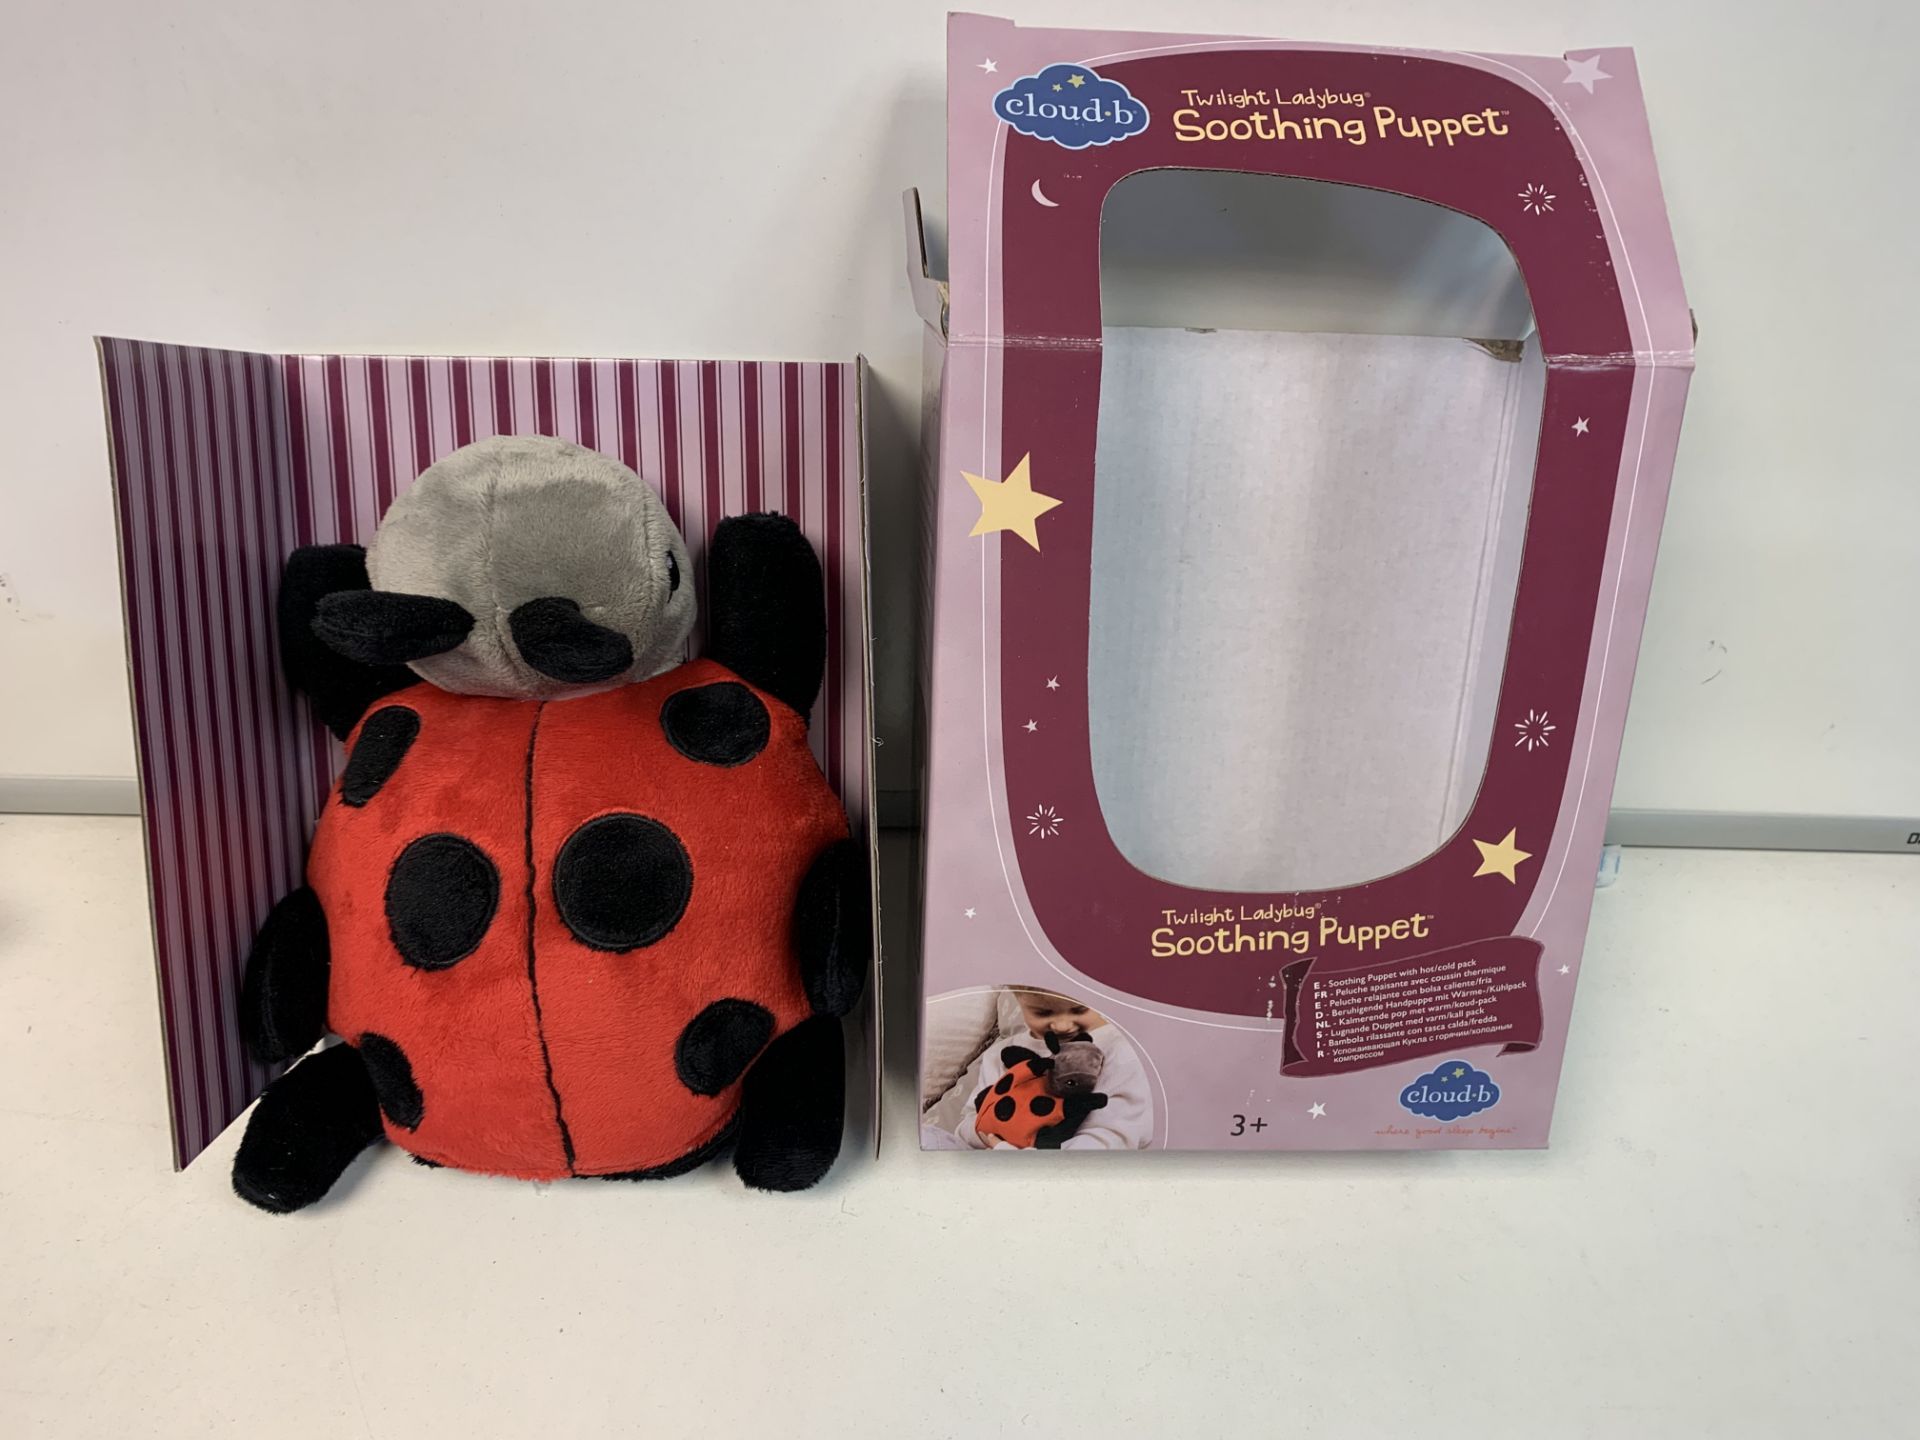 6 X NEW BOXED CLOUD-B TWILIGHT LADYBIRD SOOTHING PUPPET WITH HOT/COLD PACK. A WARM HUG ON A COLD